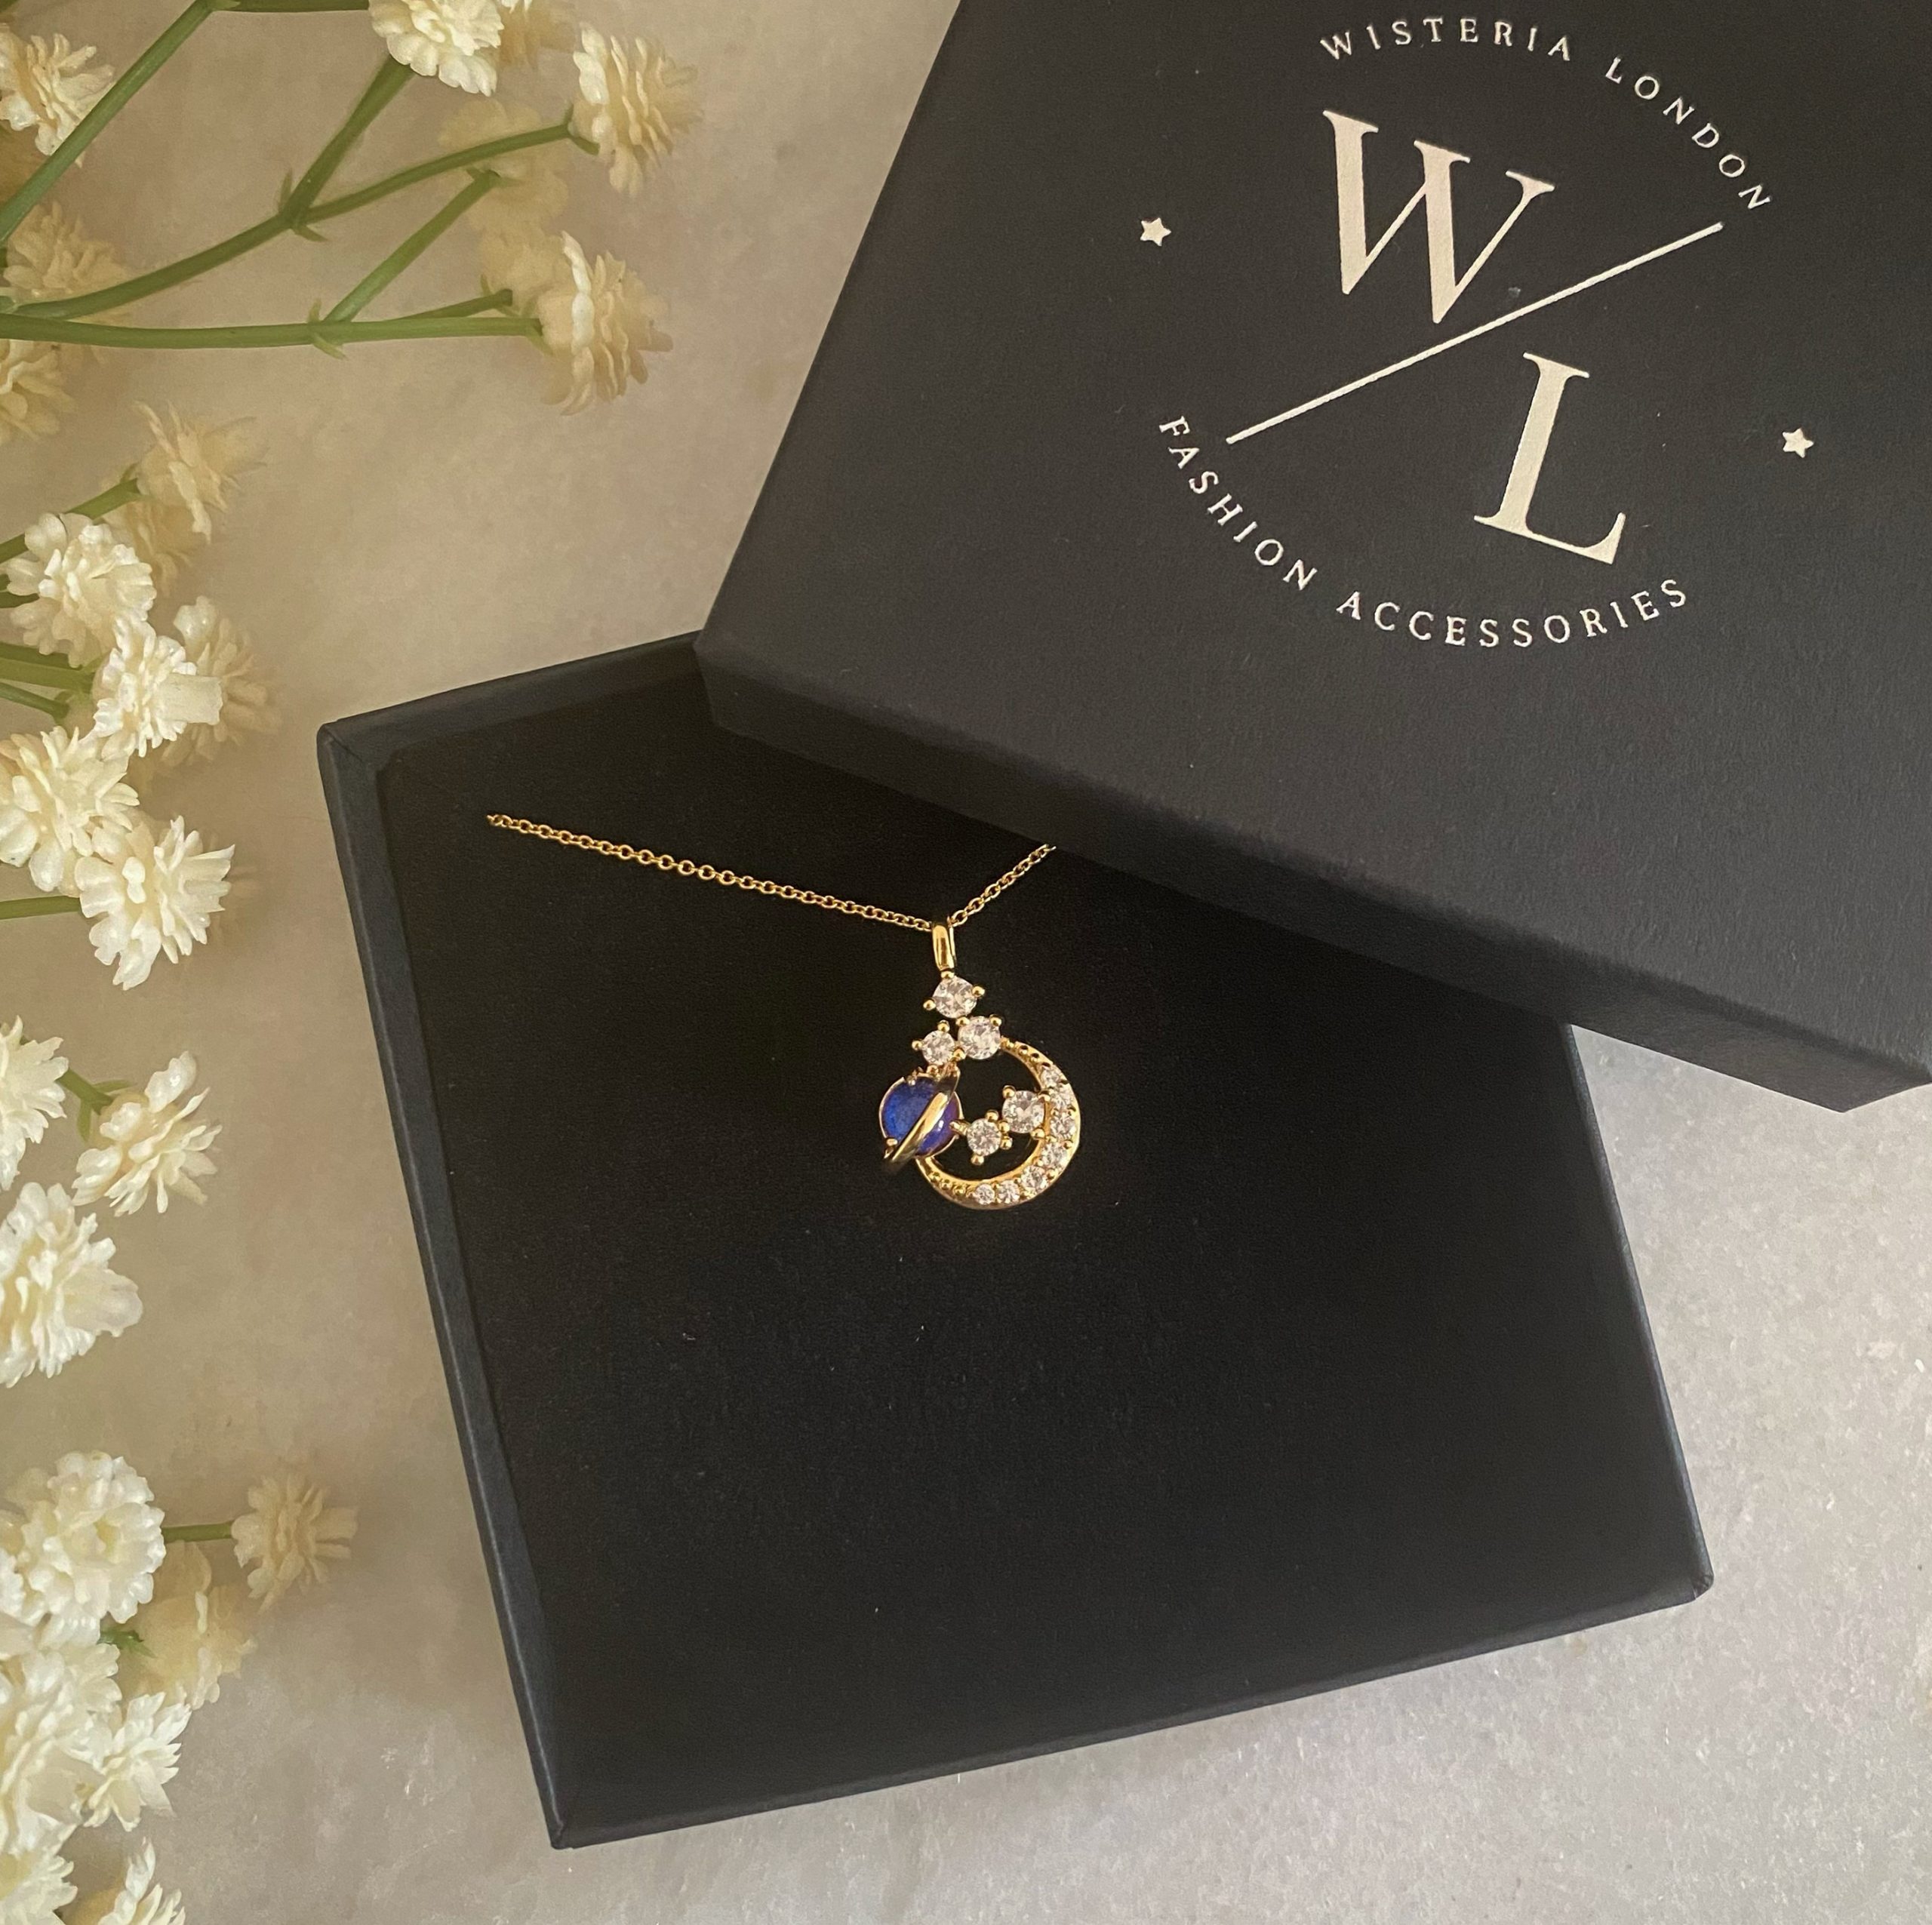 Aura Gold Blue Planet Moon and Star Necklace - Wisteria London